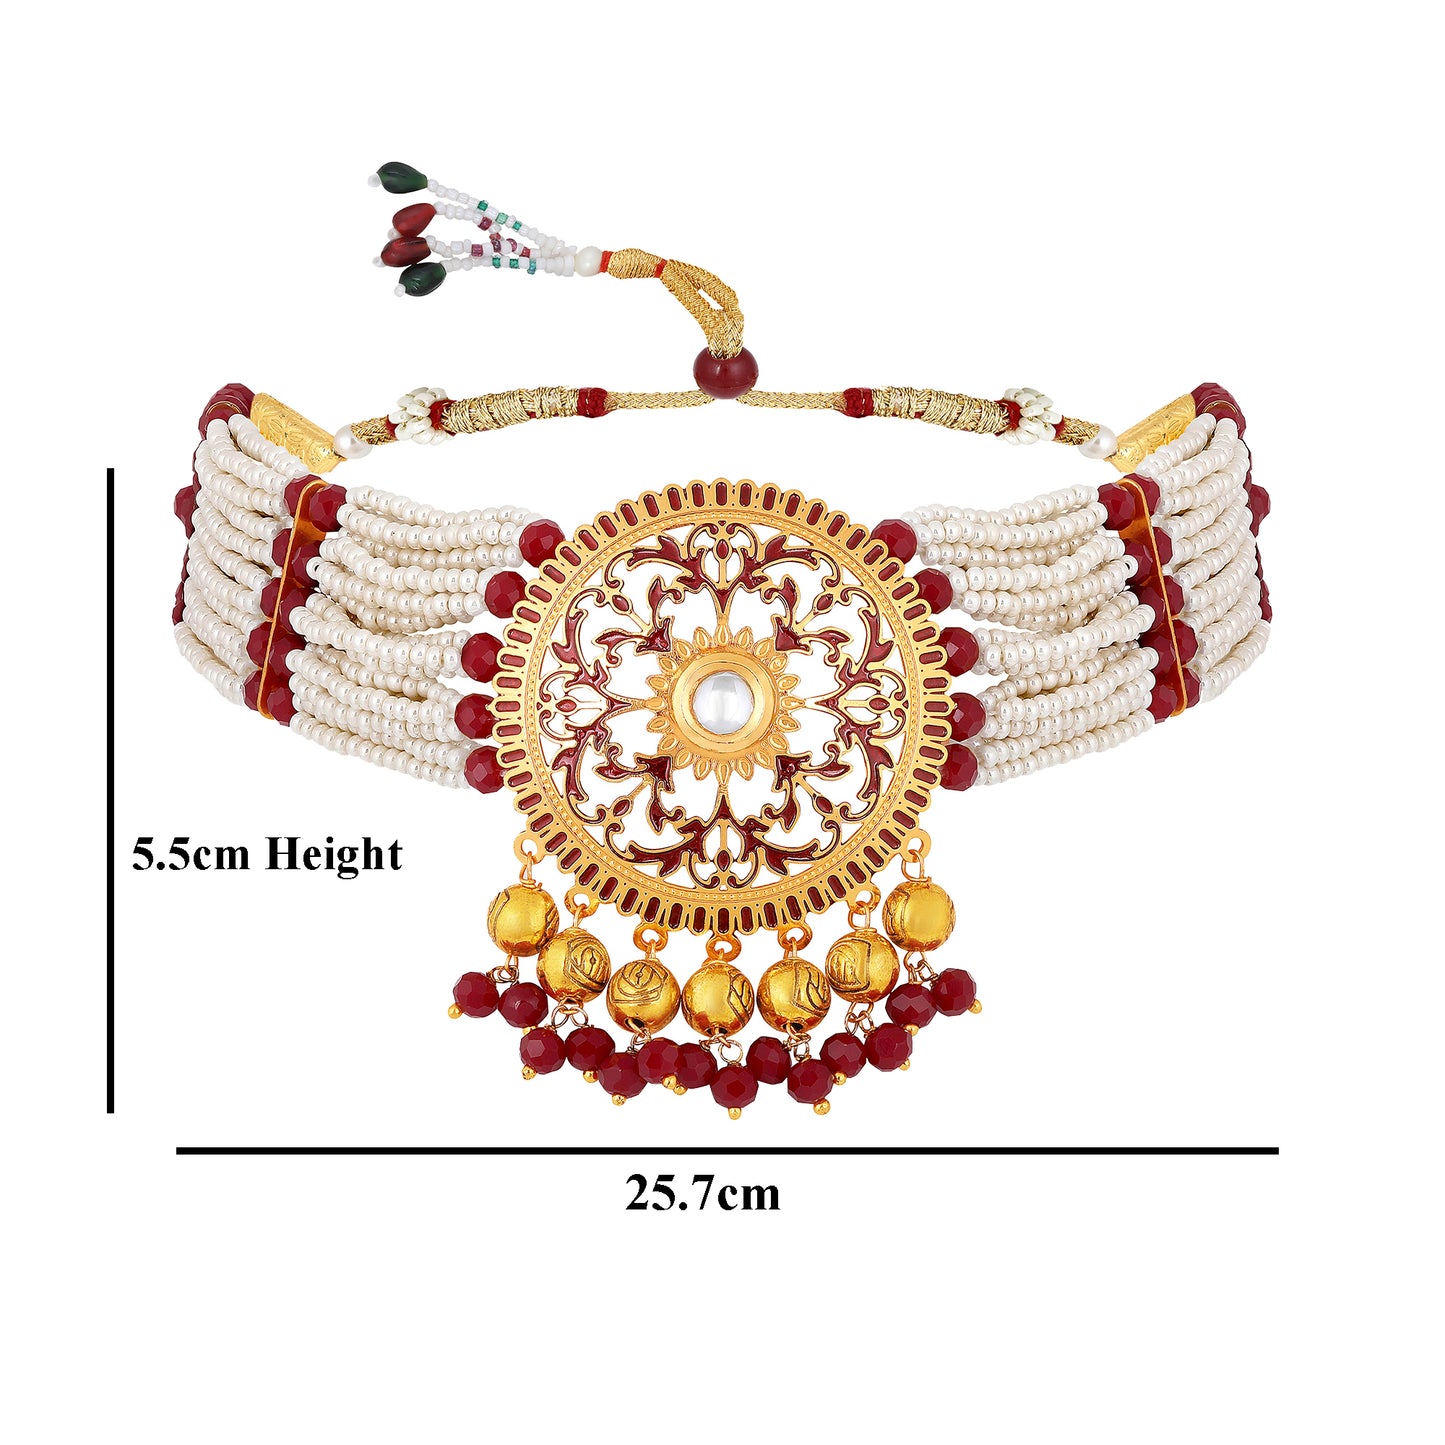 Bdiva 18K Gold Plated Intricately Carved Red Beads Round Choker Necklace.